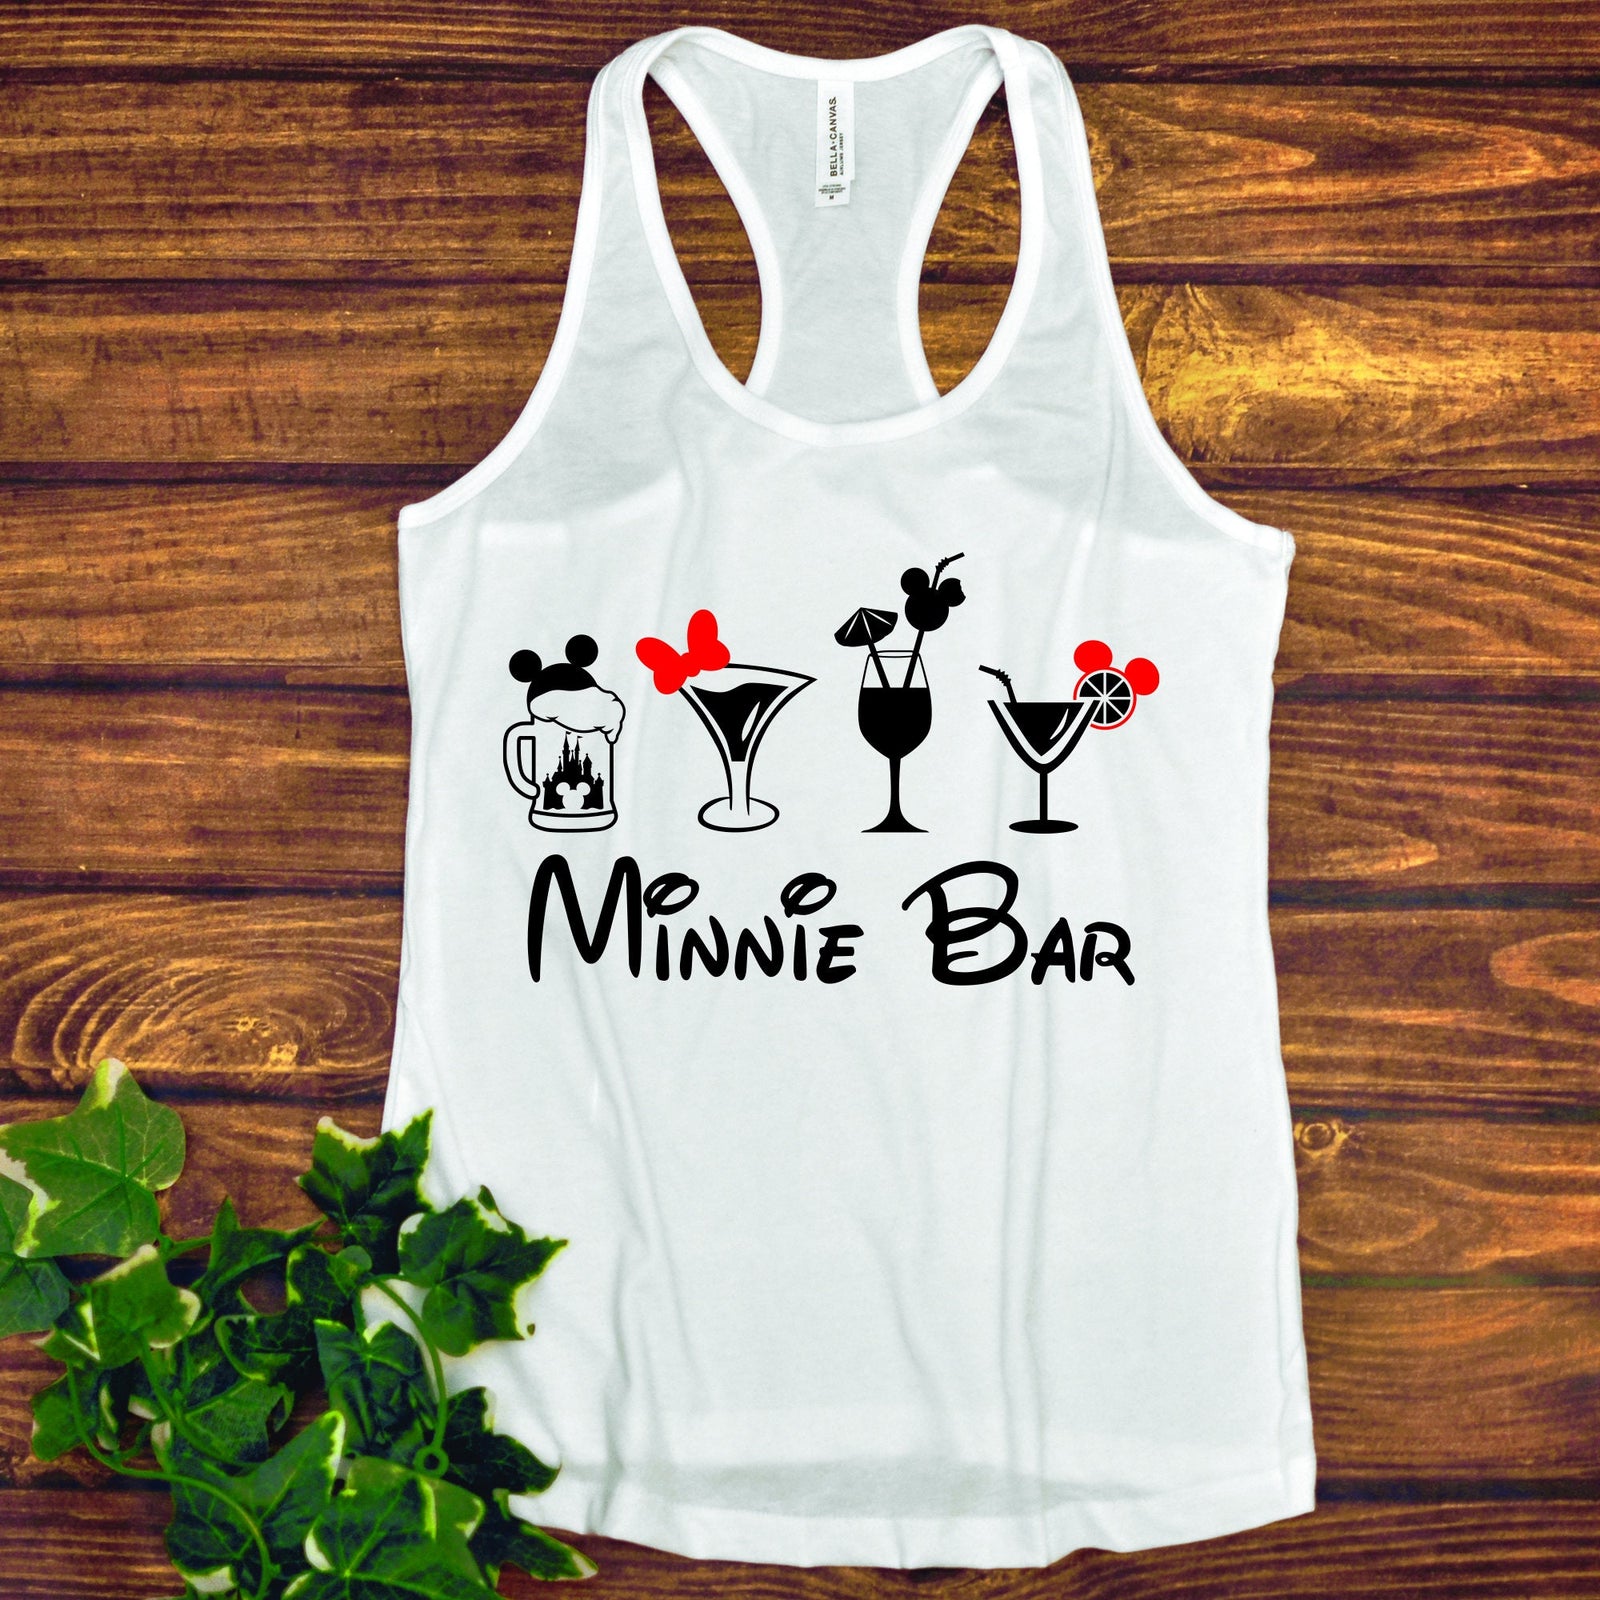 Minnie Mouse Ladies Racer Back Tank Top- Minnie Bar - Drinks - Epcot Food and Wine